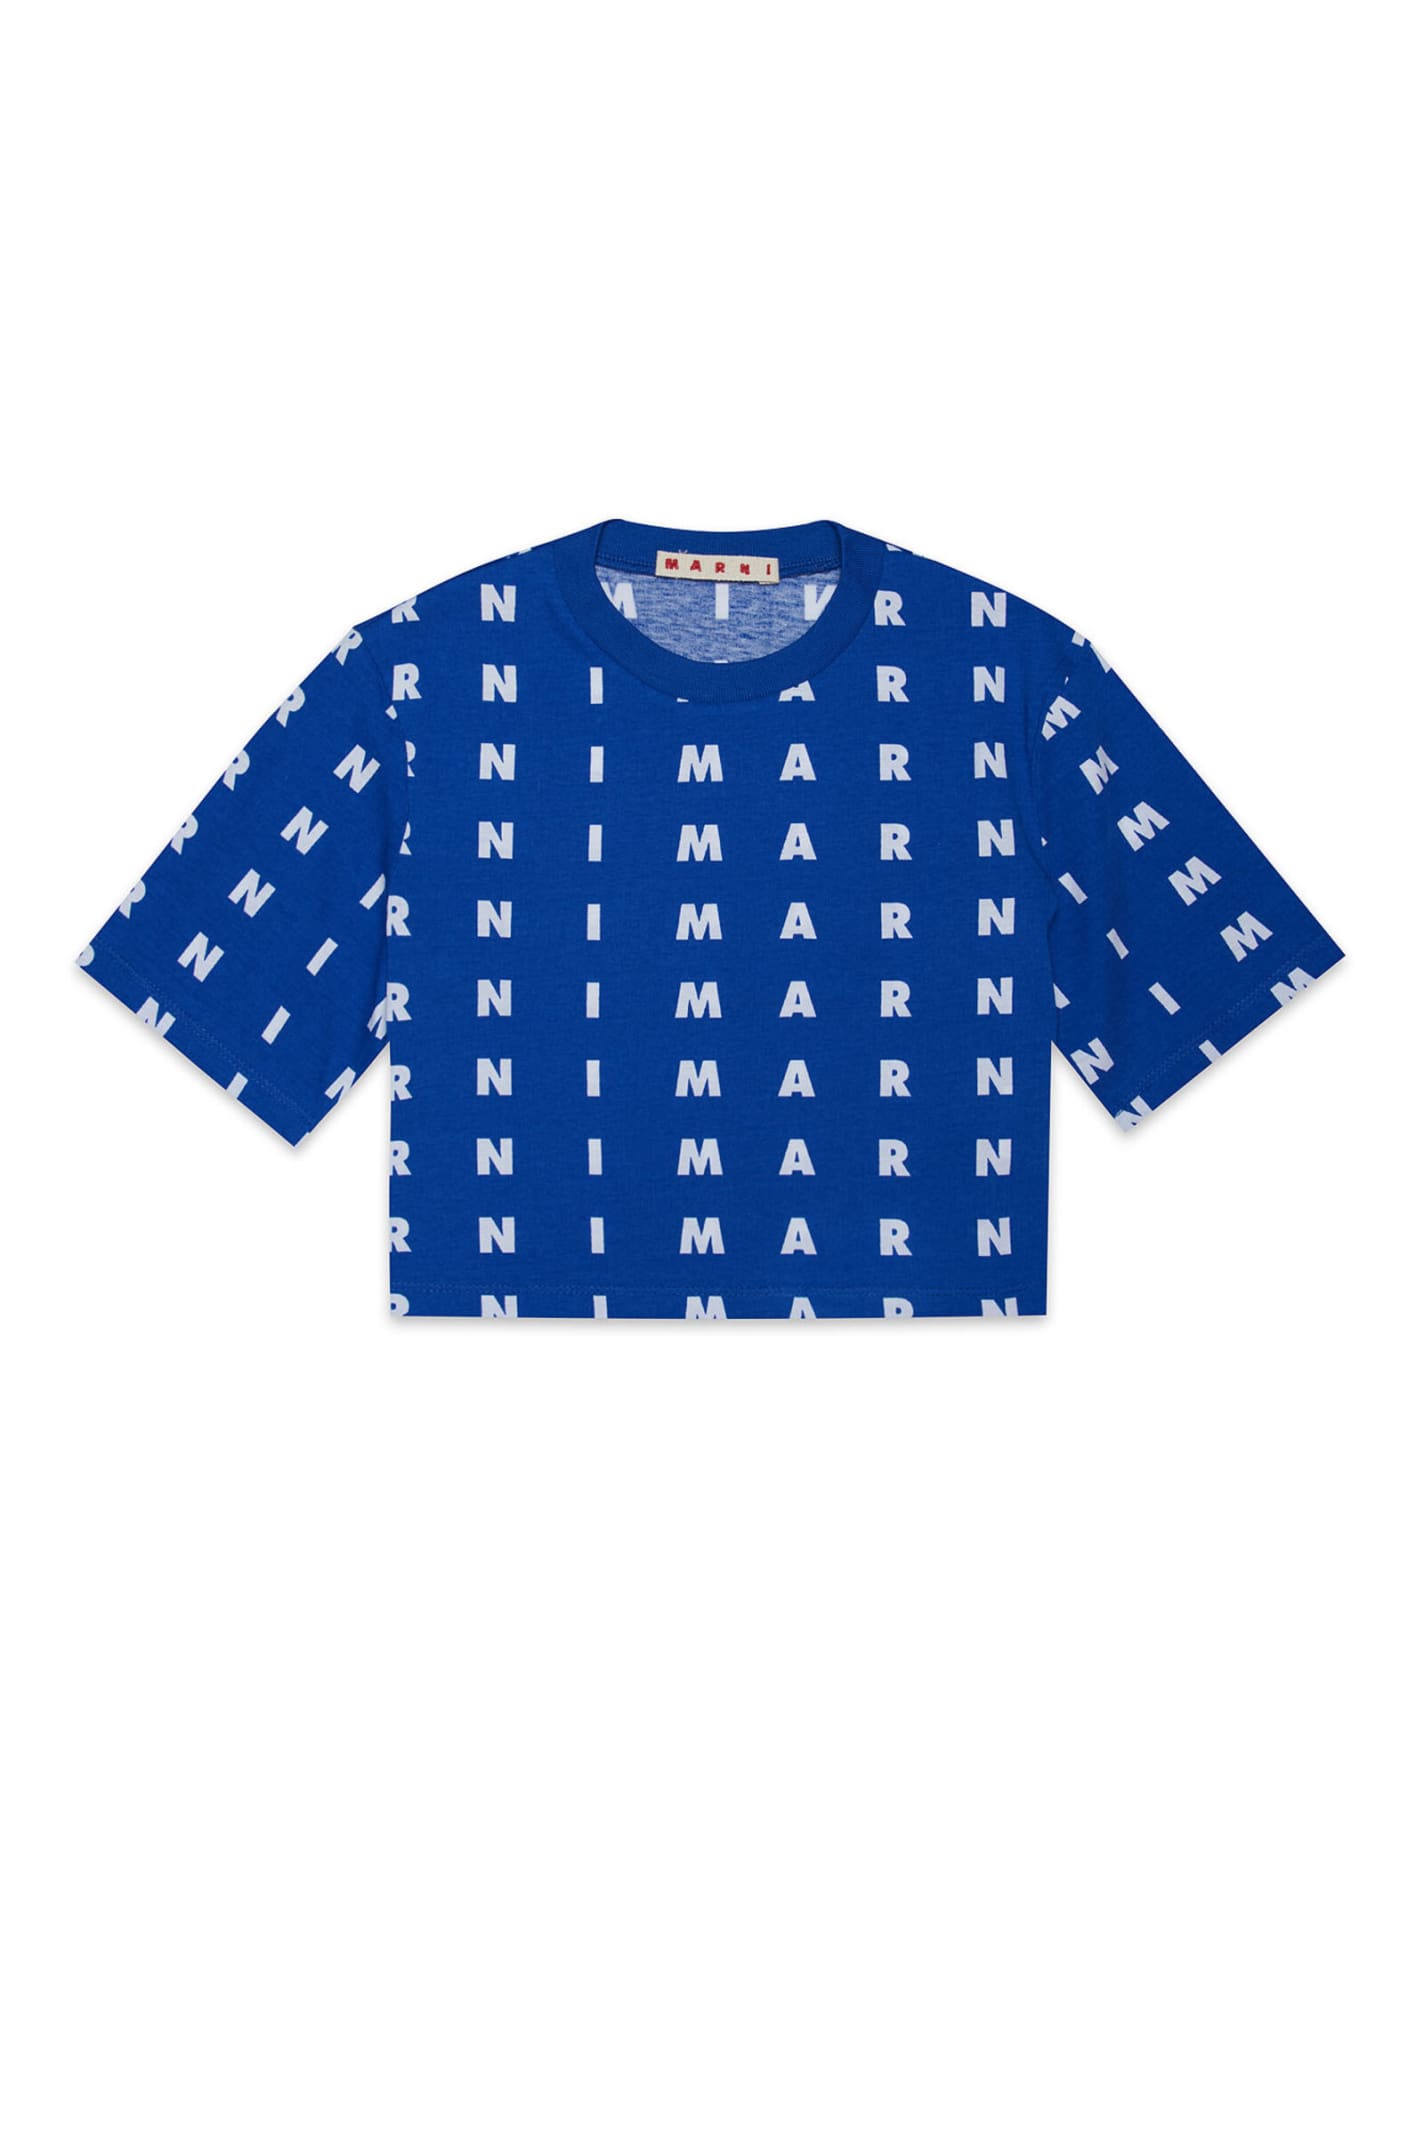 MARNI MT215F T-SHIRT MARNI BLUE CROPPED JERSEY T-SHIRT WITH SMALL ALLOVER LOGO